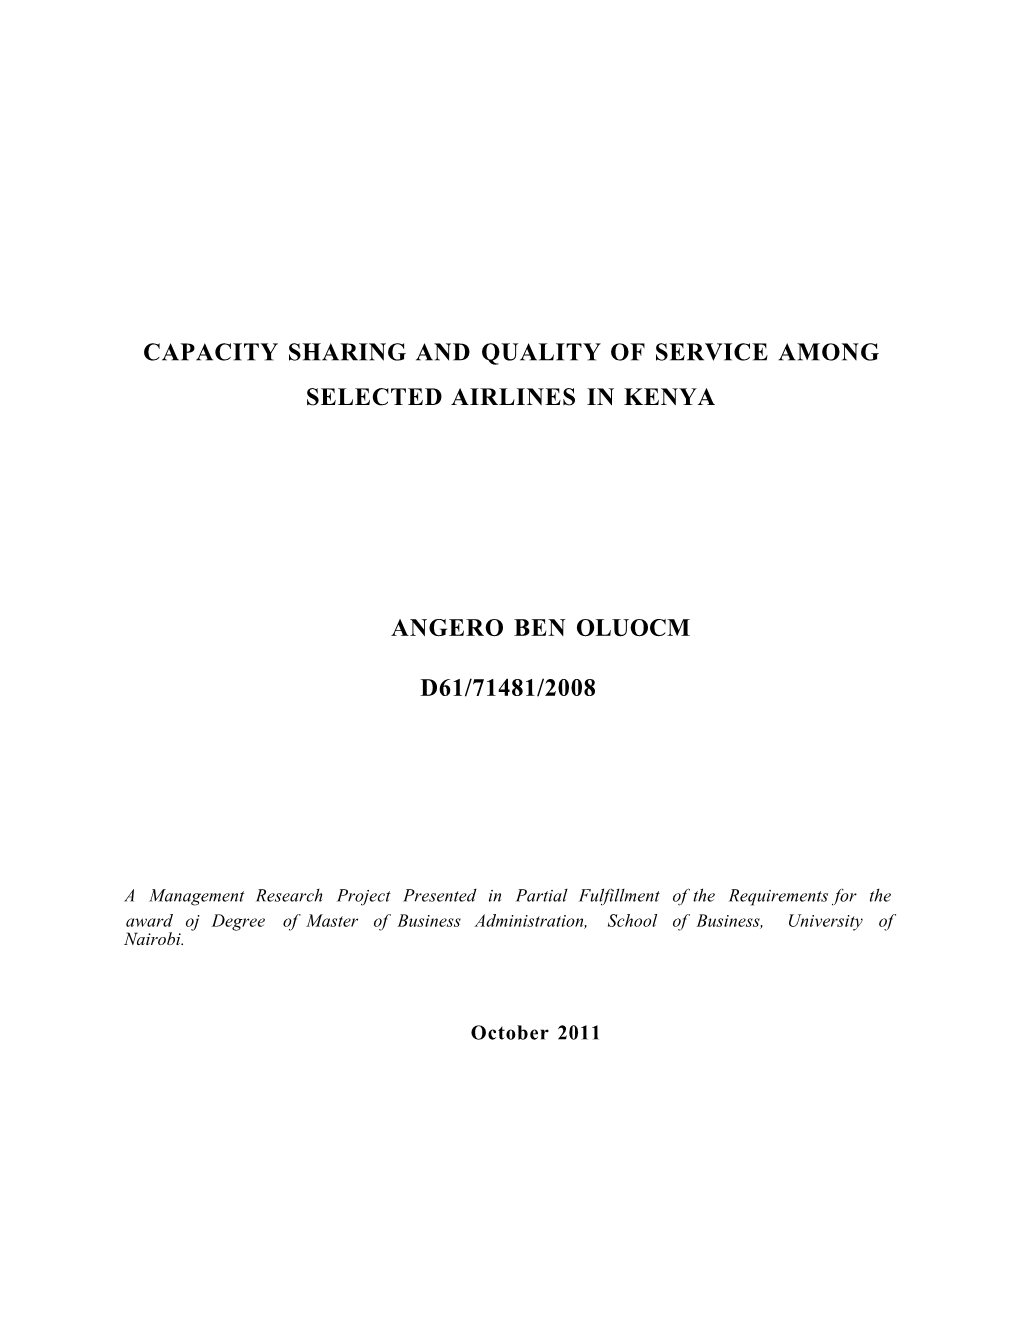 Capacity Sharing and Quality of Service Among Selected Airlines in Kenya